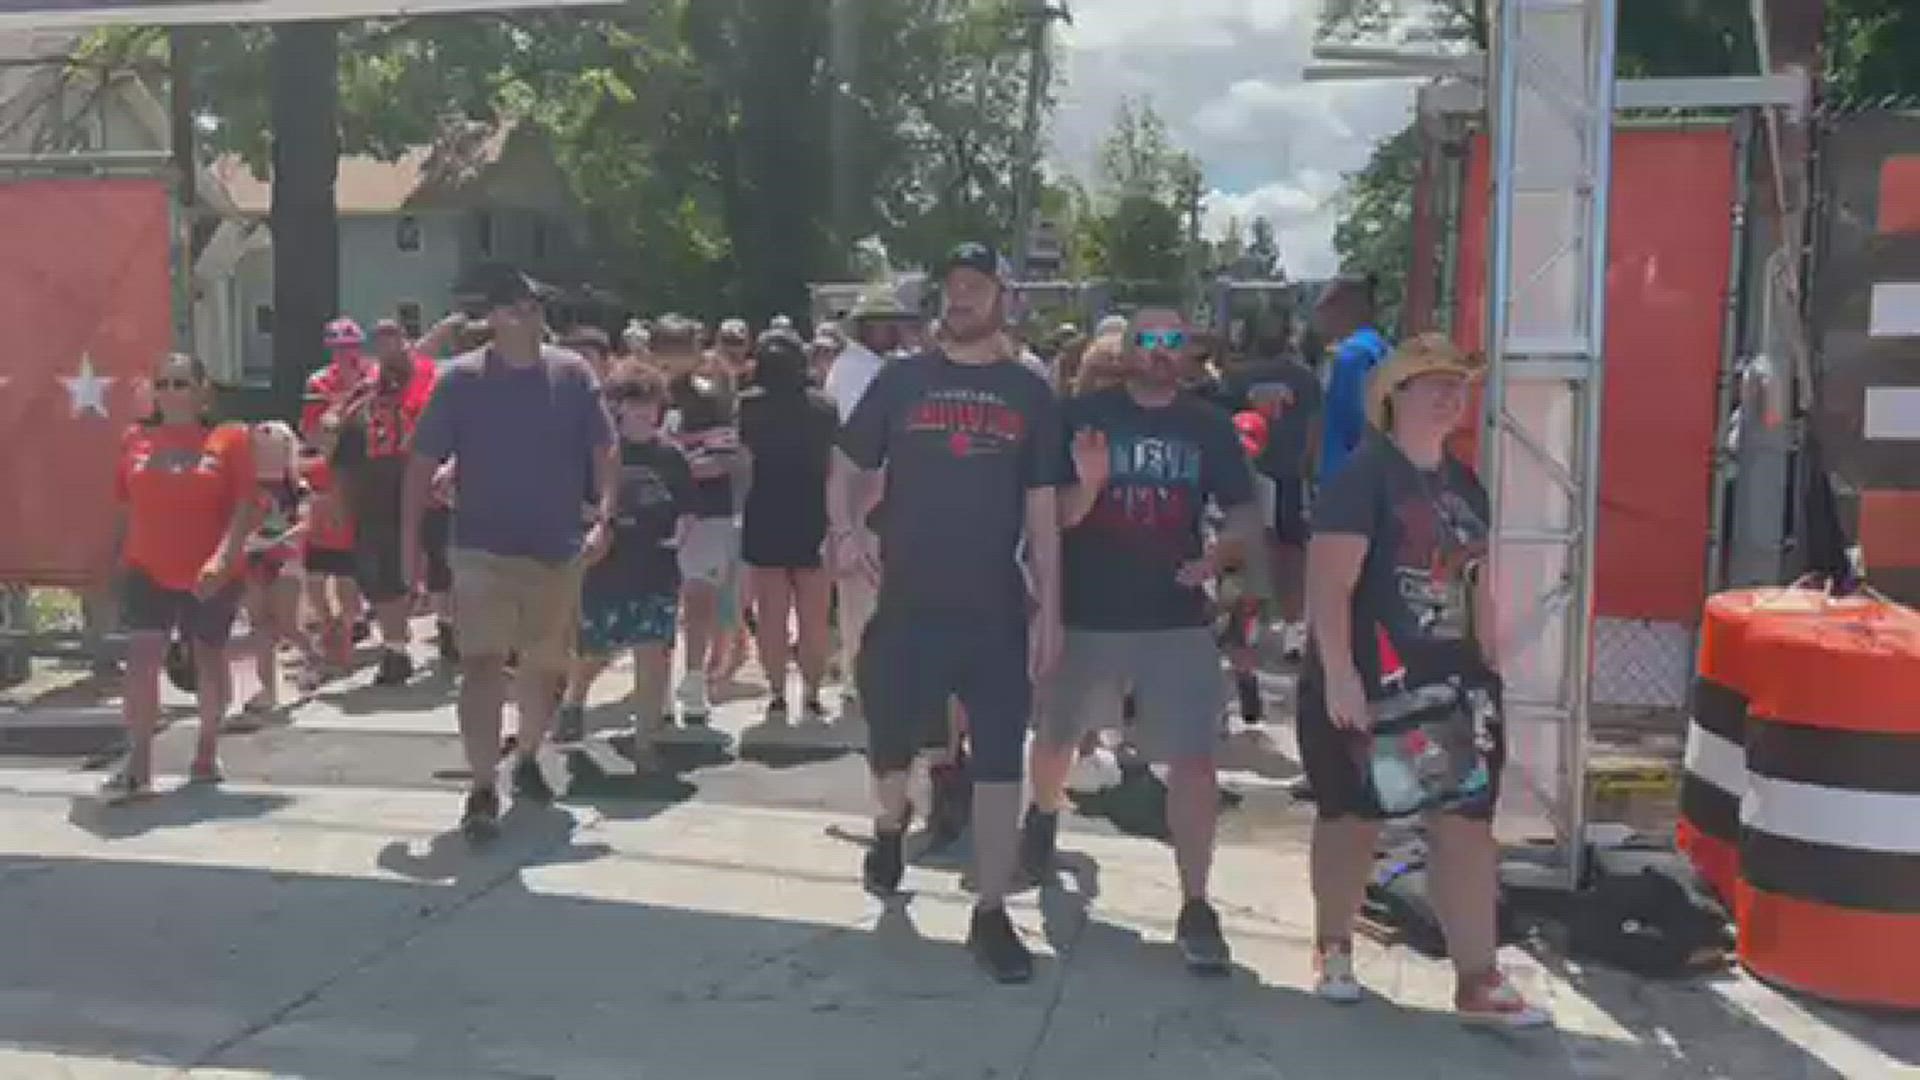 Cleveland Browns fans flocked to Berea for the first open training camp of 2022.